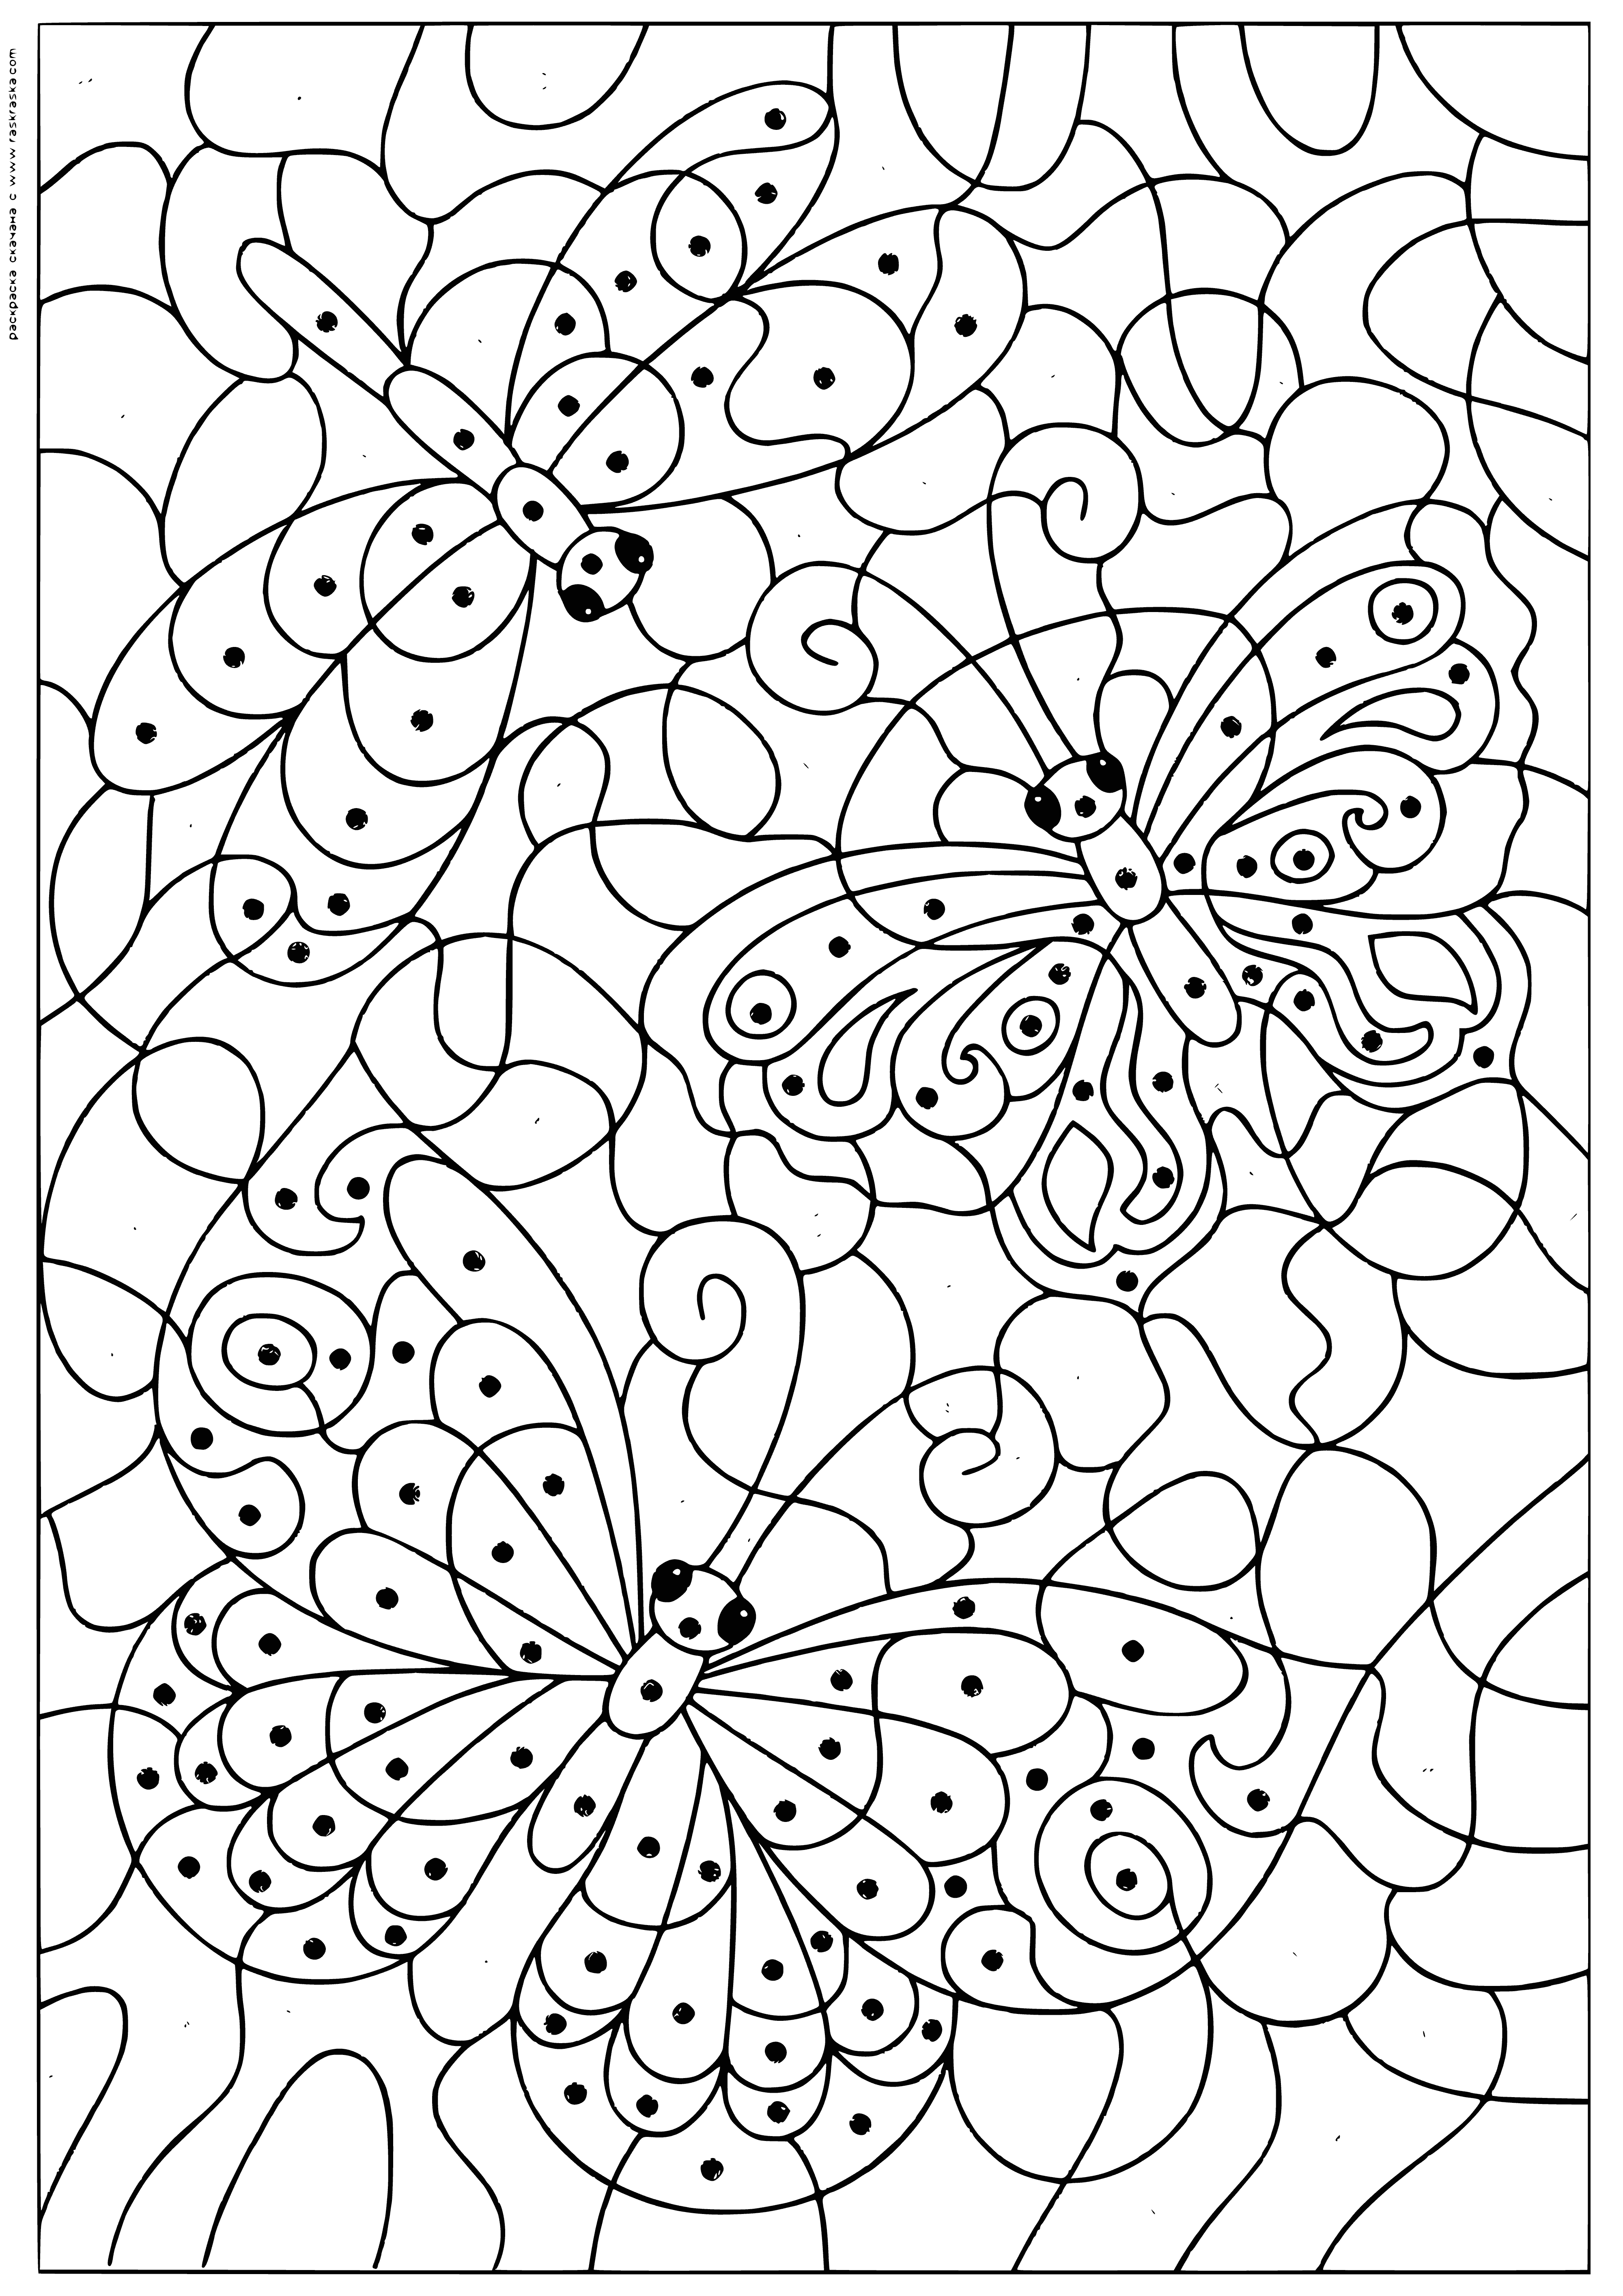 coloring page: Two flying insects--dragonfly (yellow/black) & butterfly (blue/yellow spots)--near flowers in coloring page.